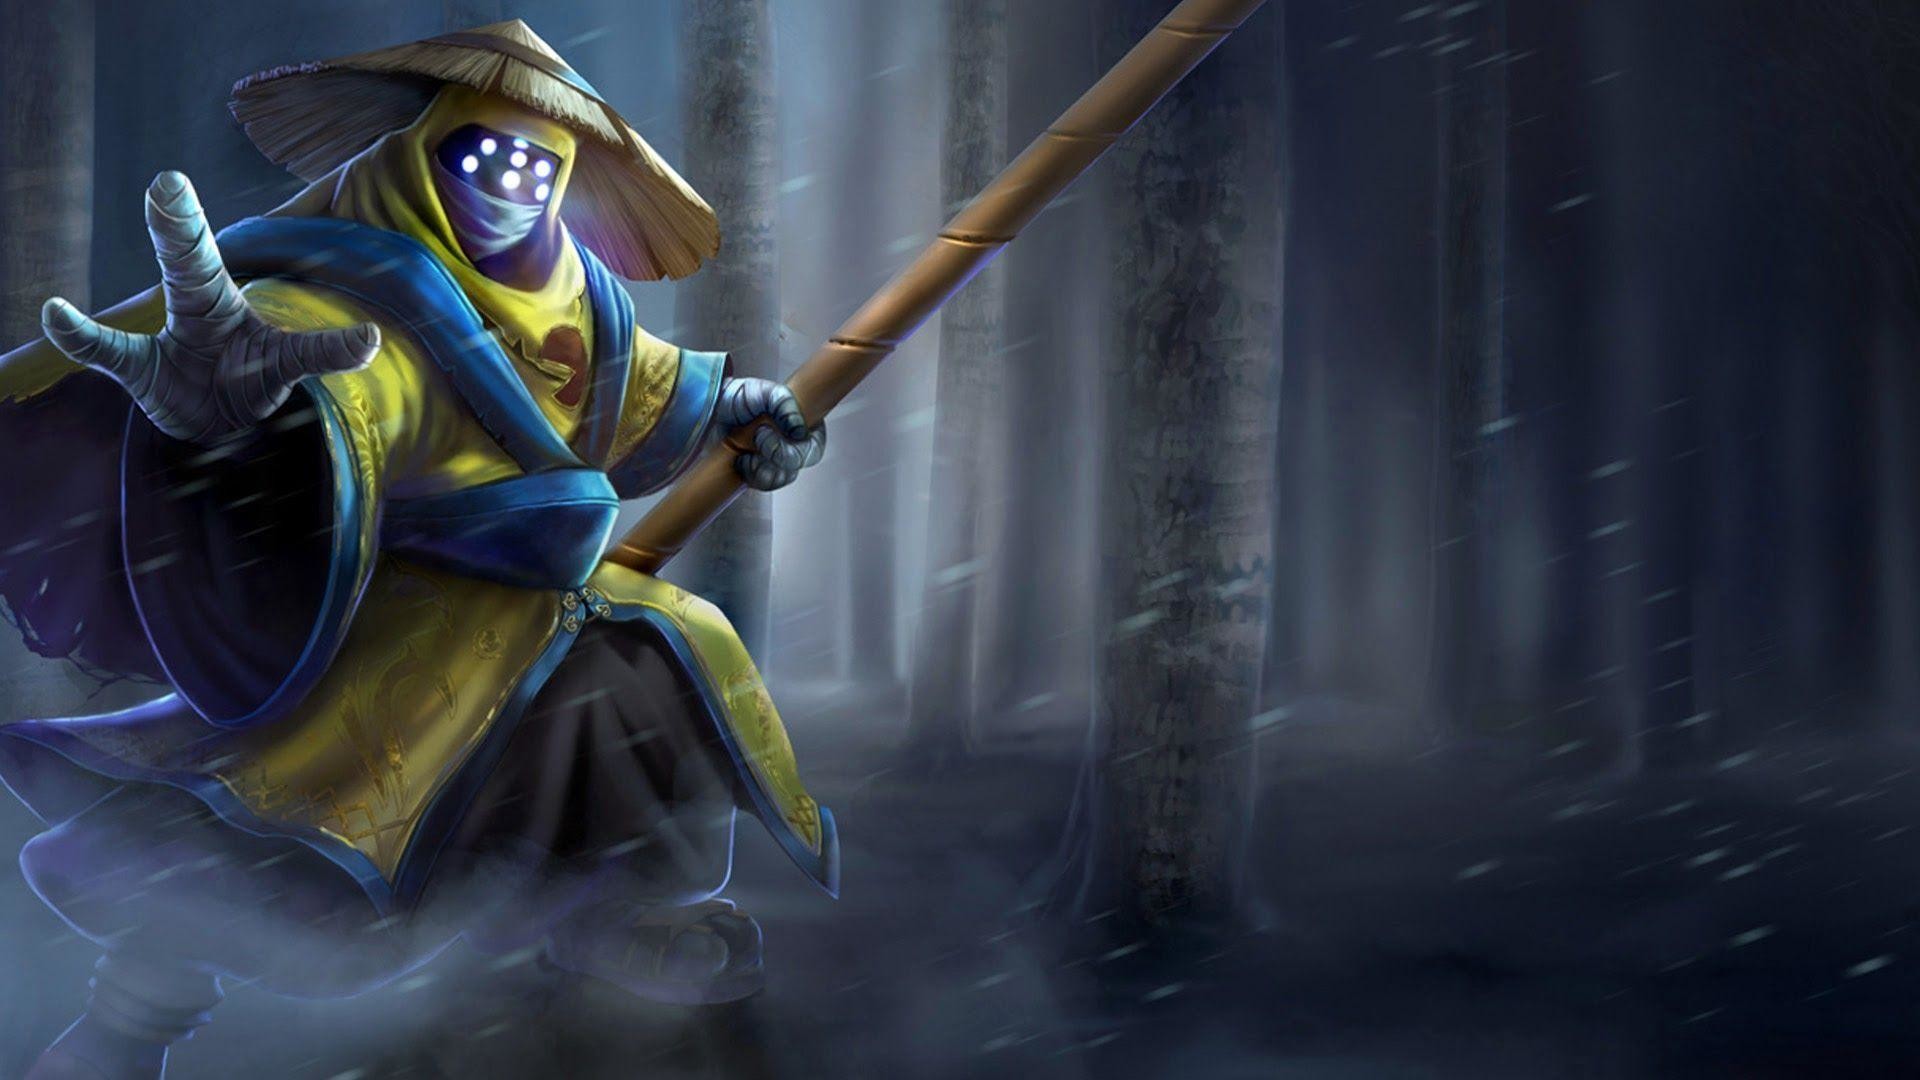 1920x1080 HD Jax in the forest - League of Legends Wallpaper